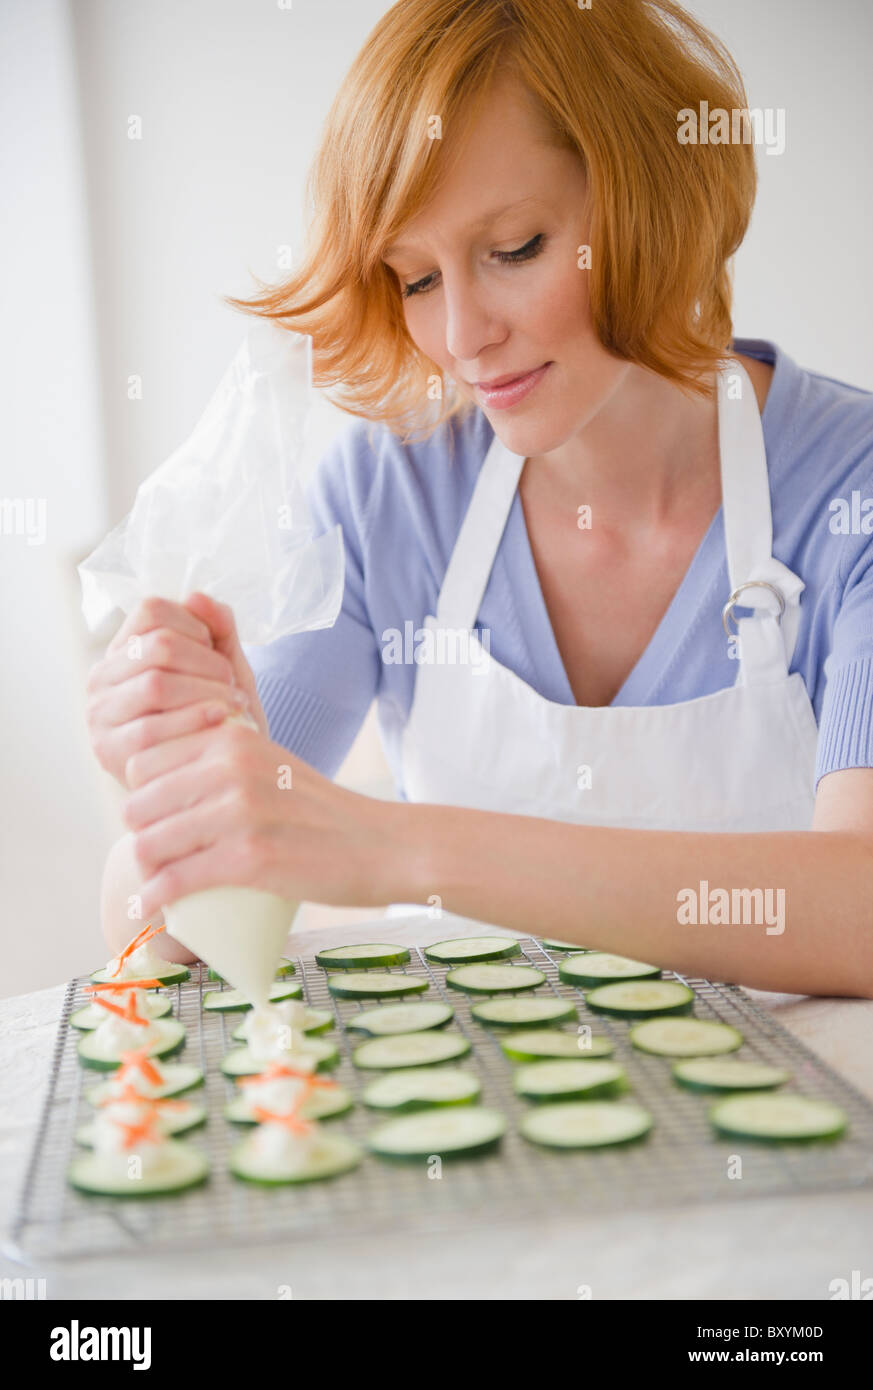 Young woman preparing appetizers Stock Photo